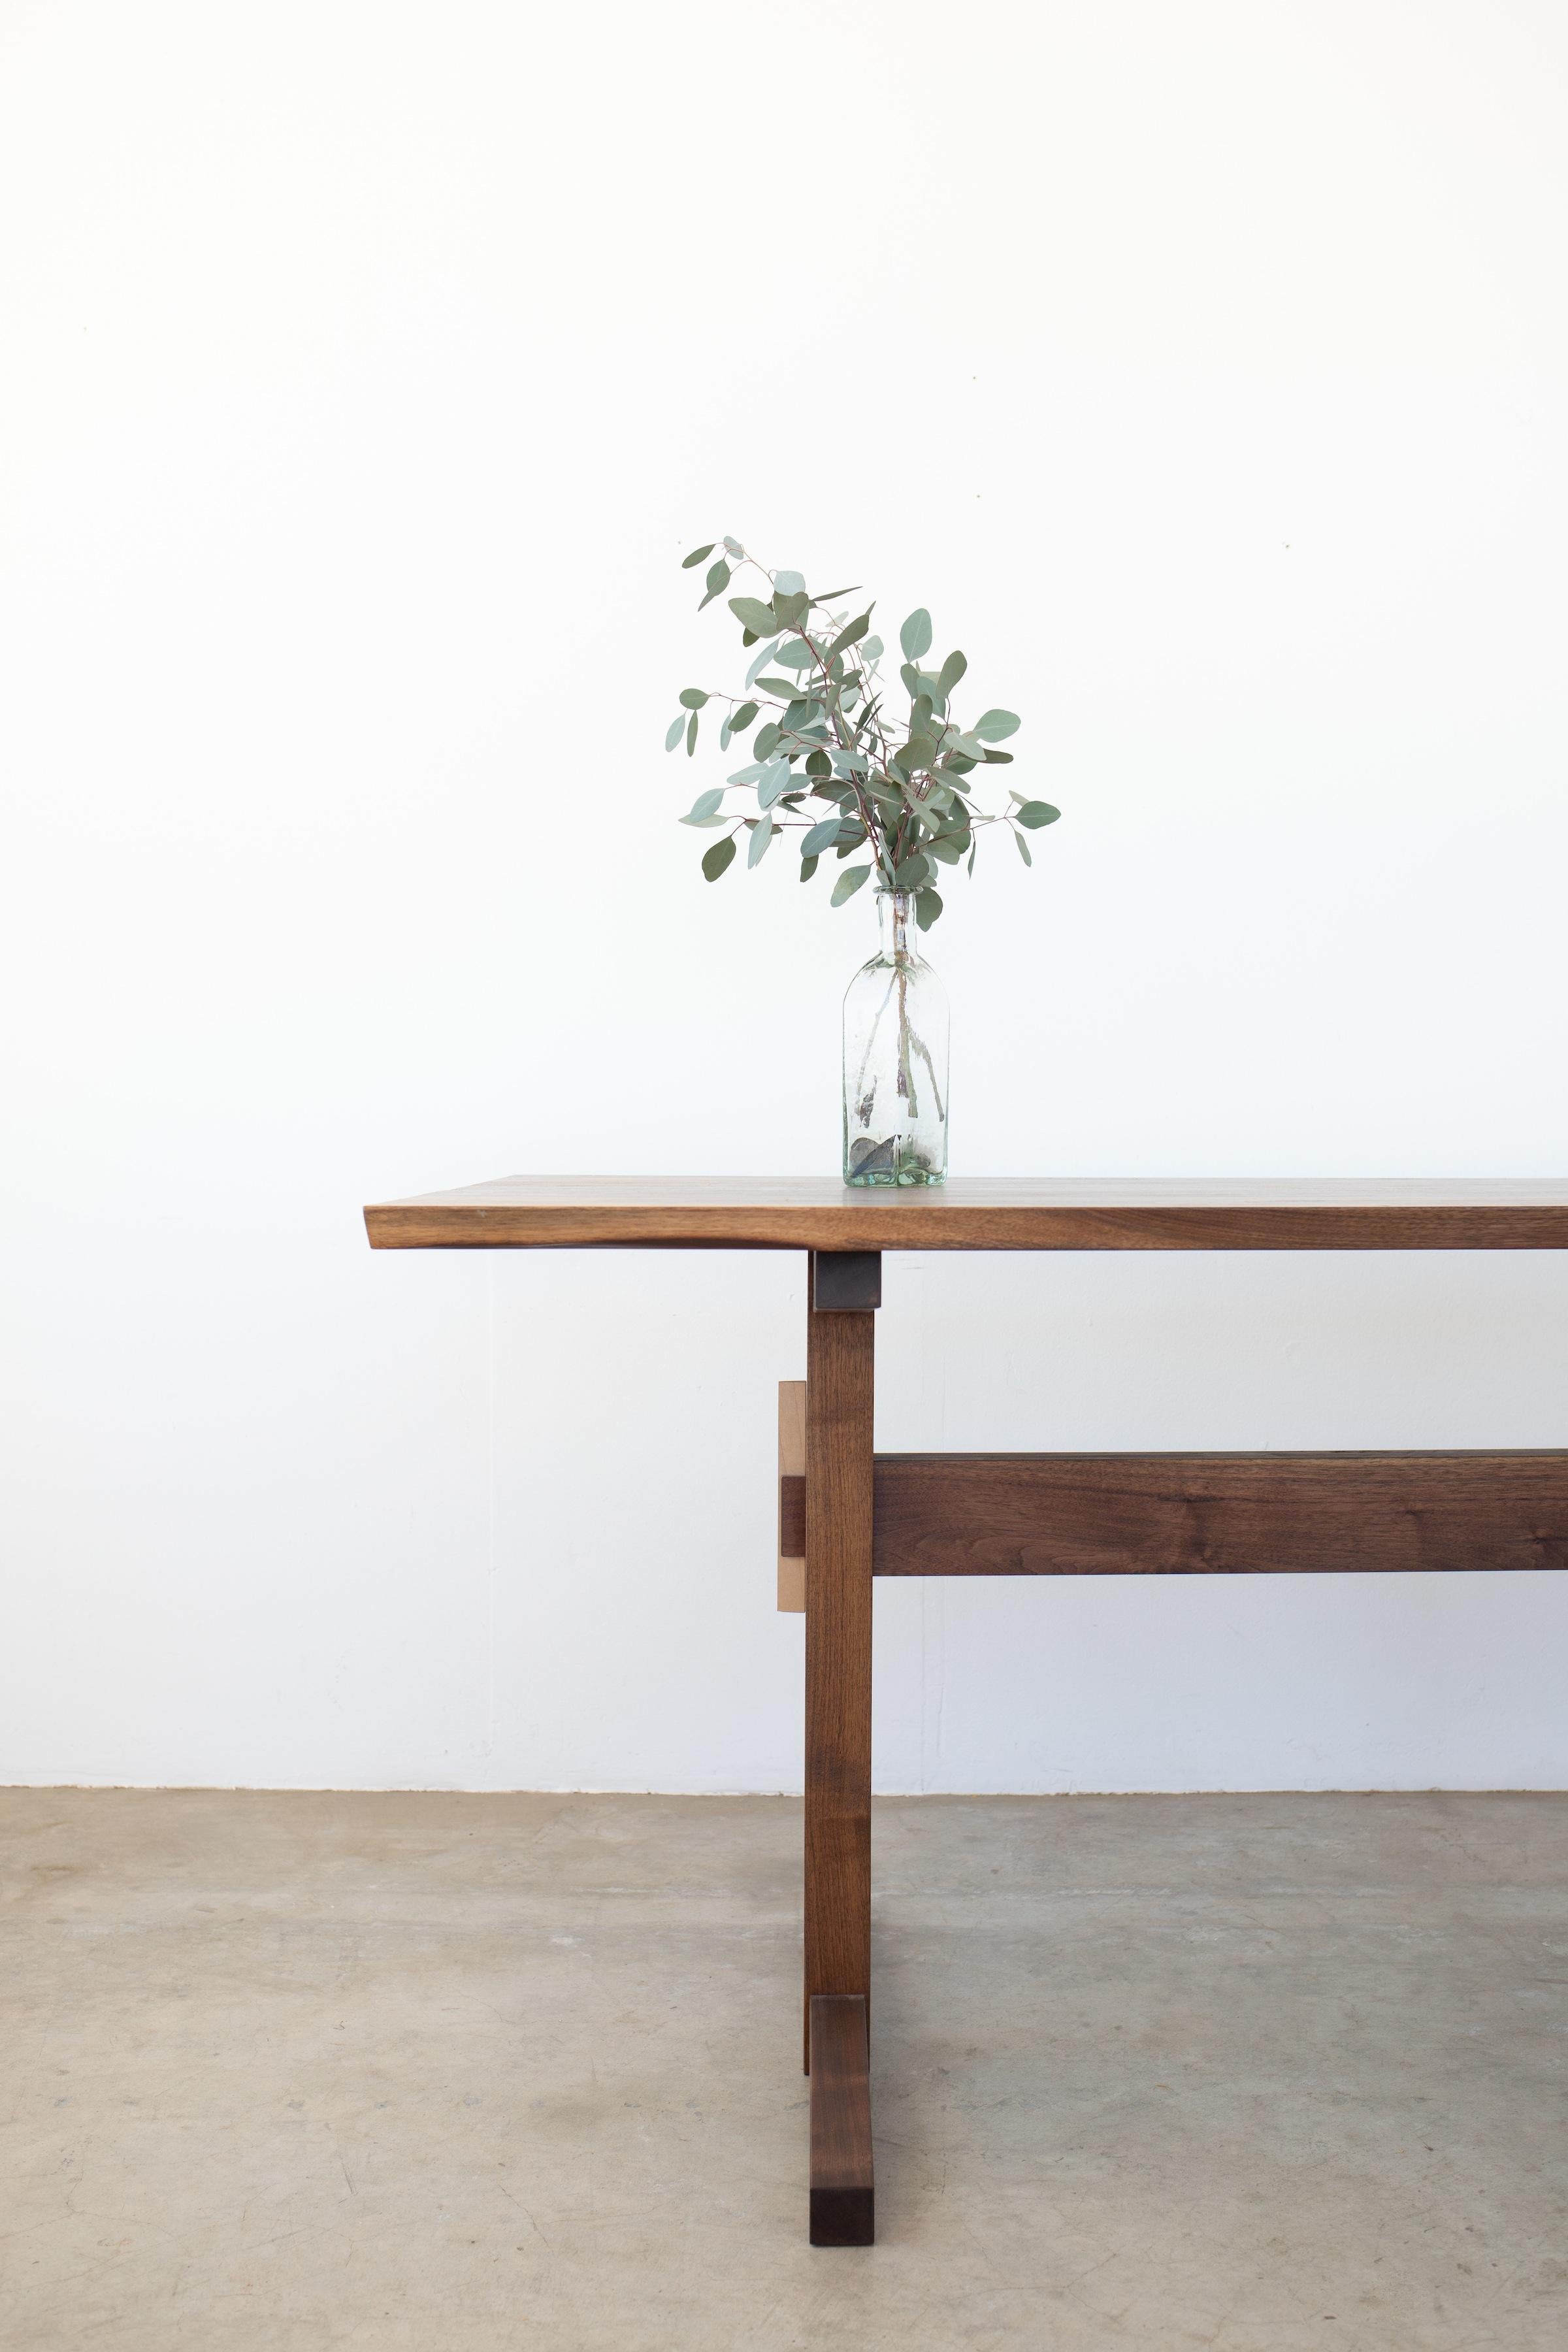 The Hana trestle dining table is our take on the classic trestle form, beloved by both the shakers and their distant woodworking cousins, the Japanese-who have reinterpreted the design in the most beautiful ways.

Each table begins with